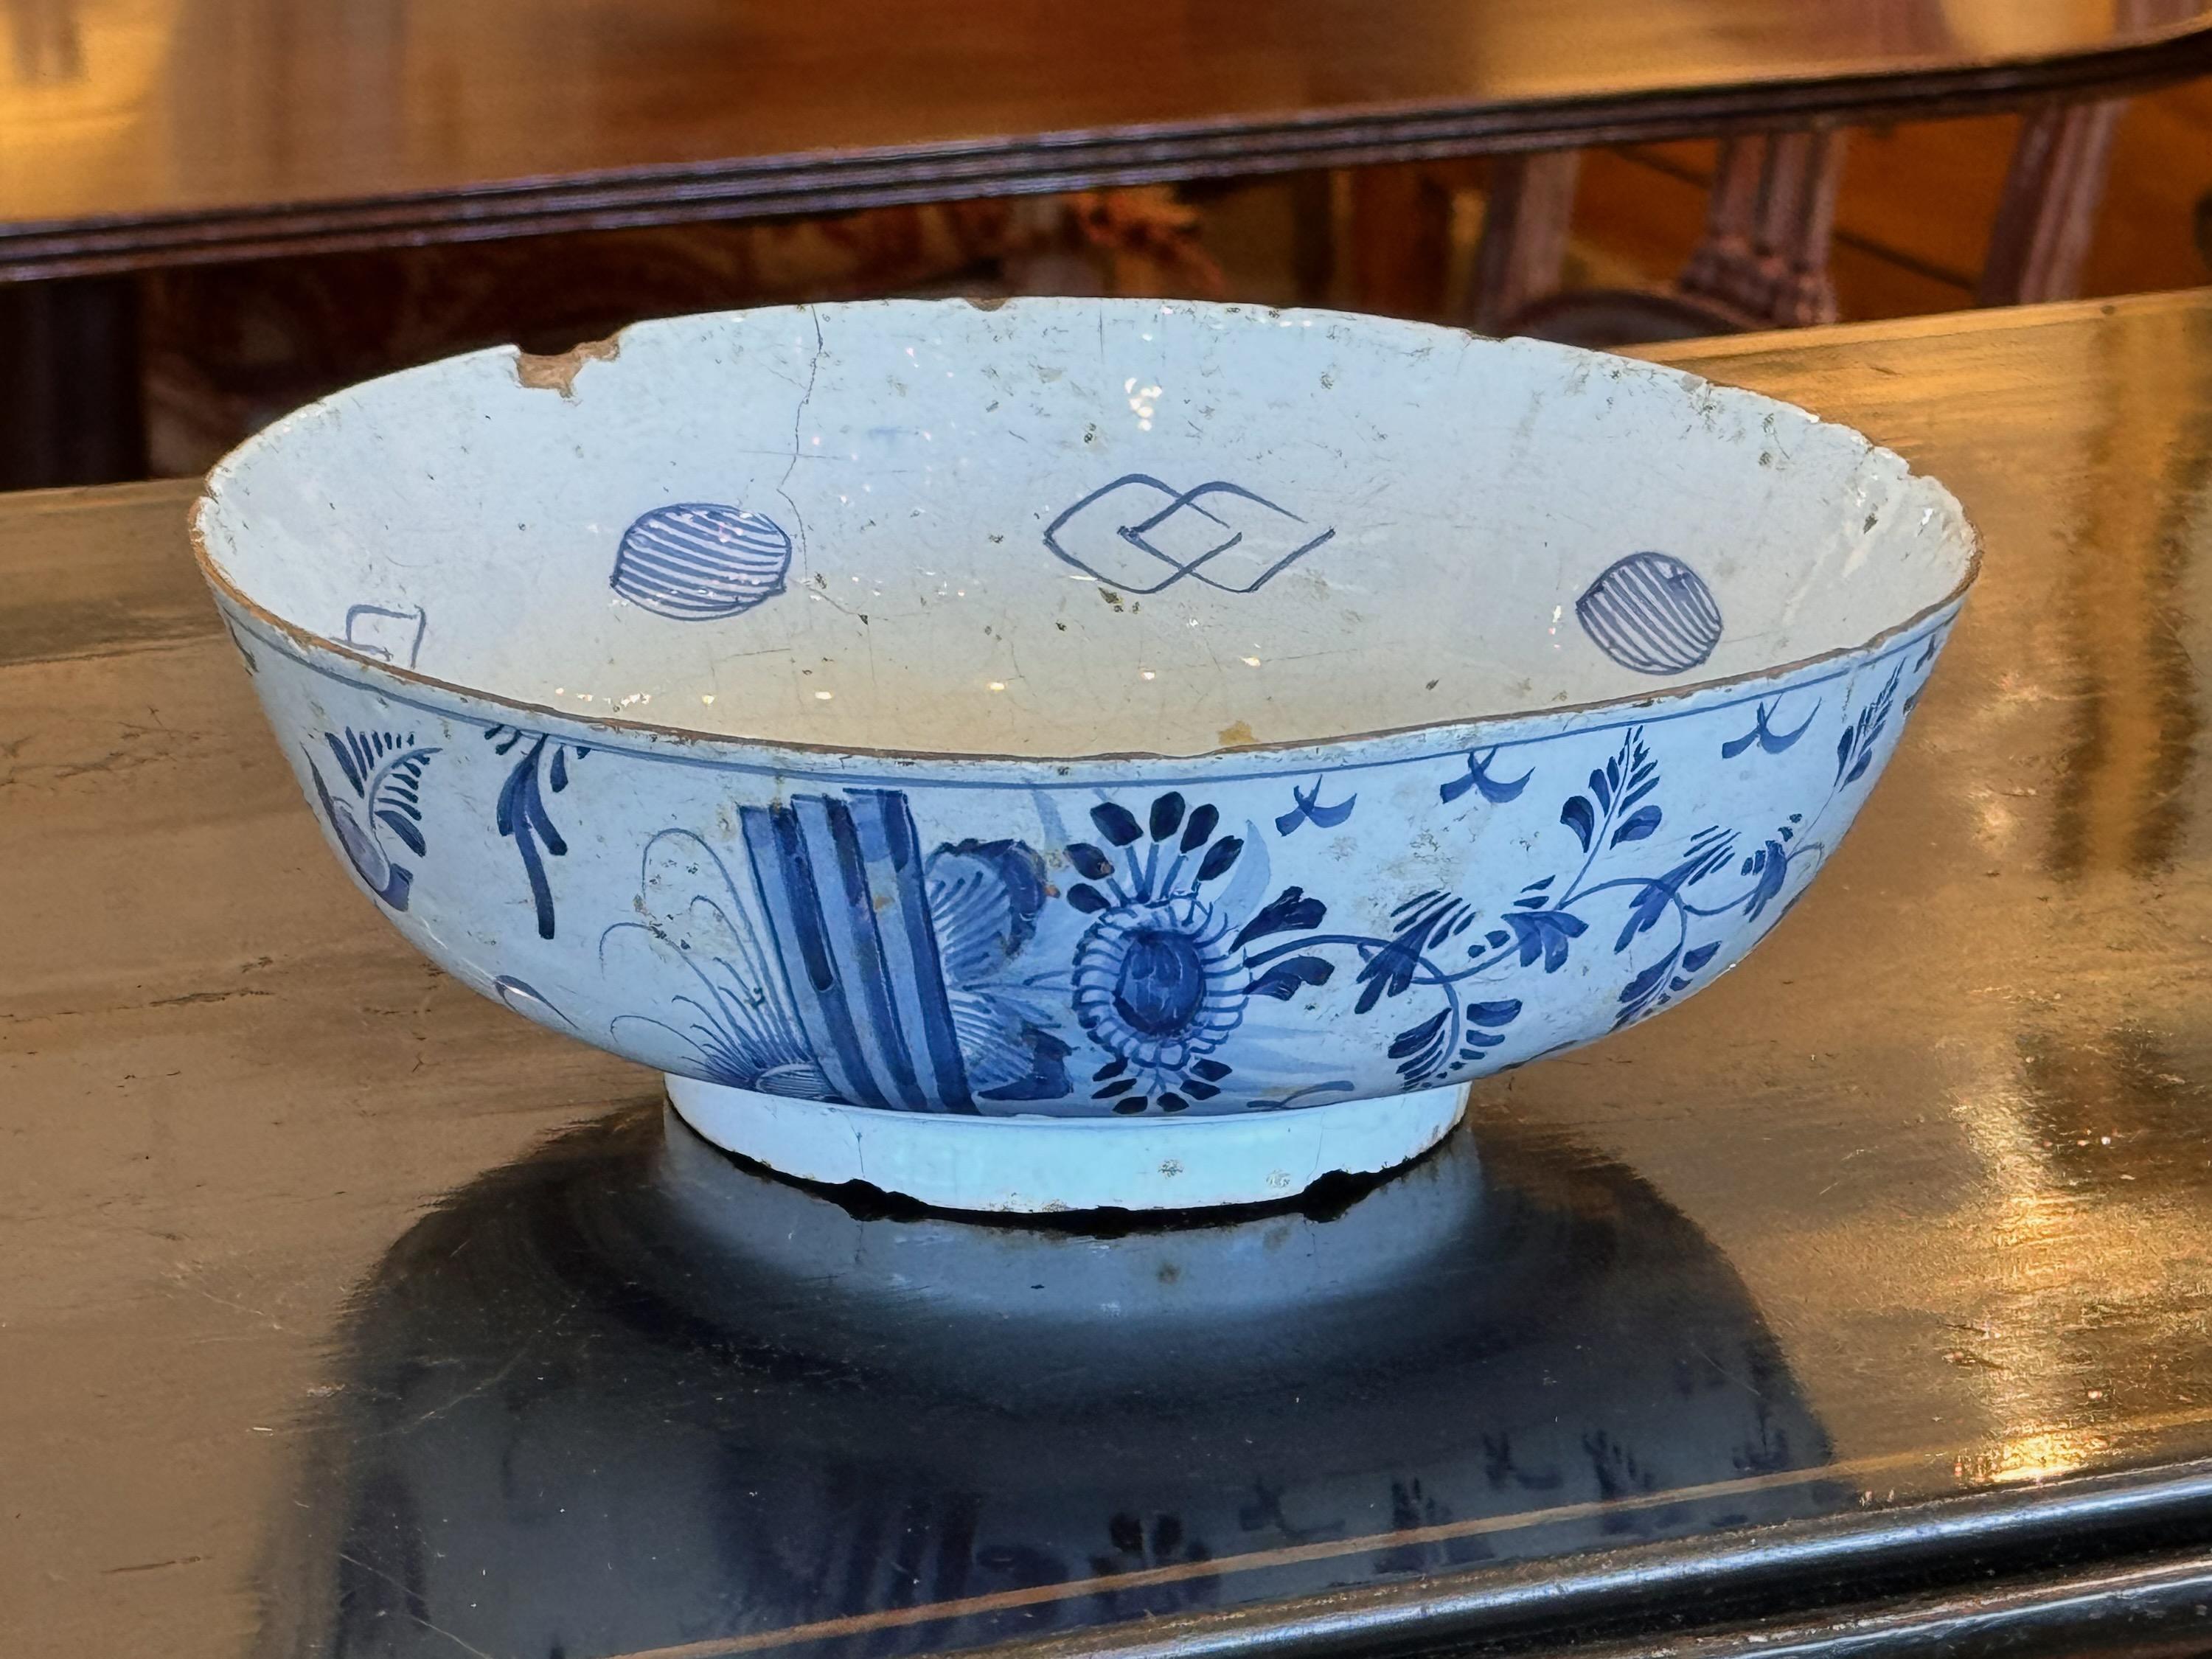 A nice size delft bowl. Lovely with imperfections.